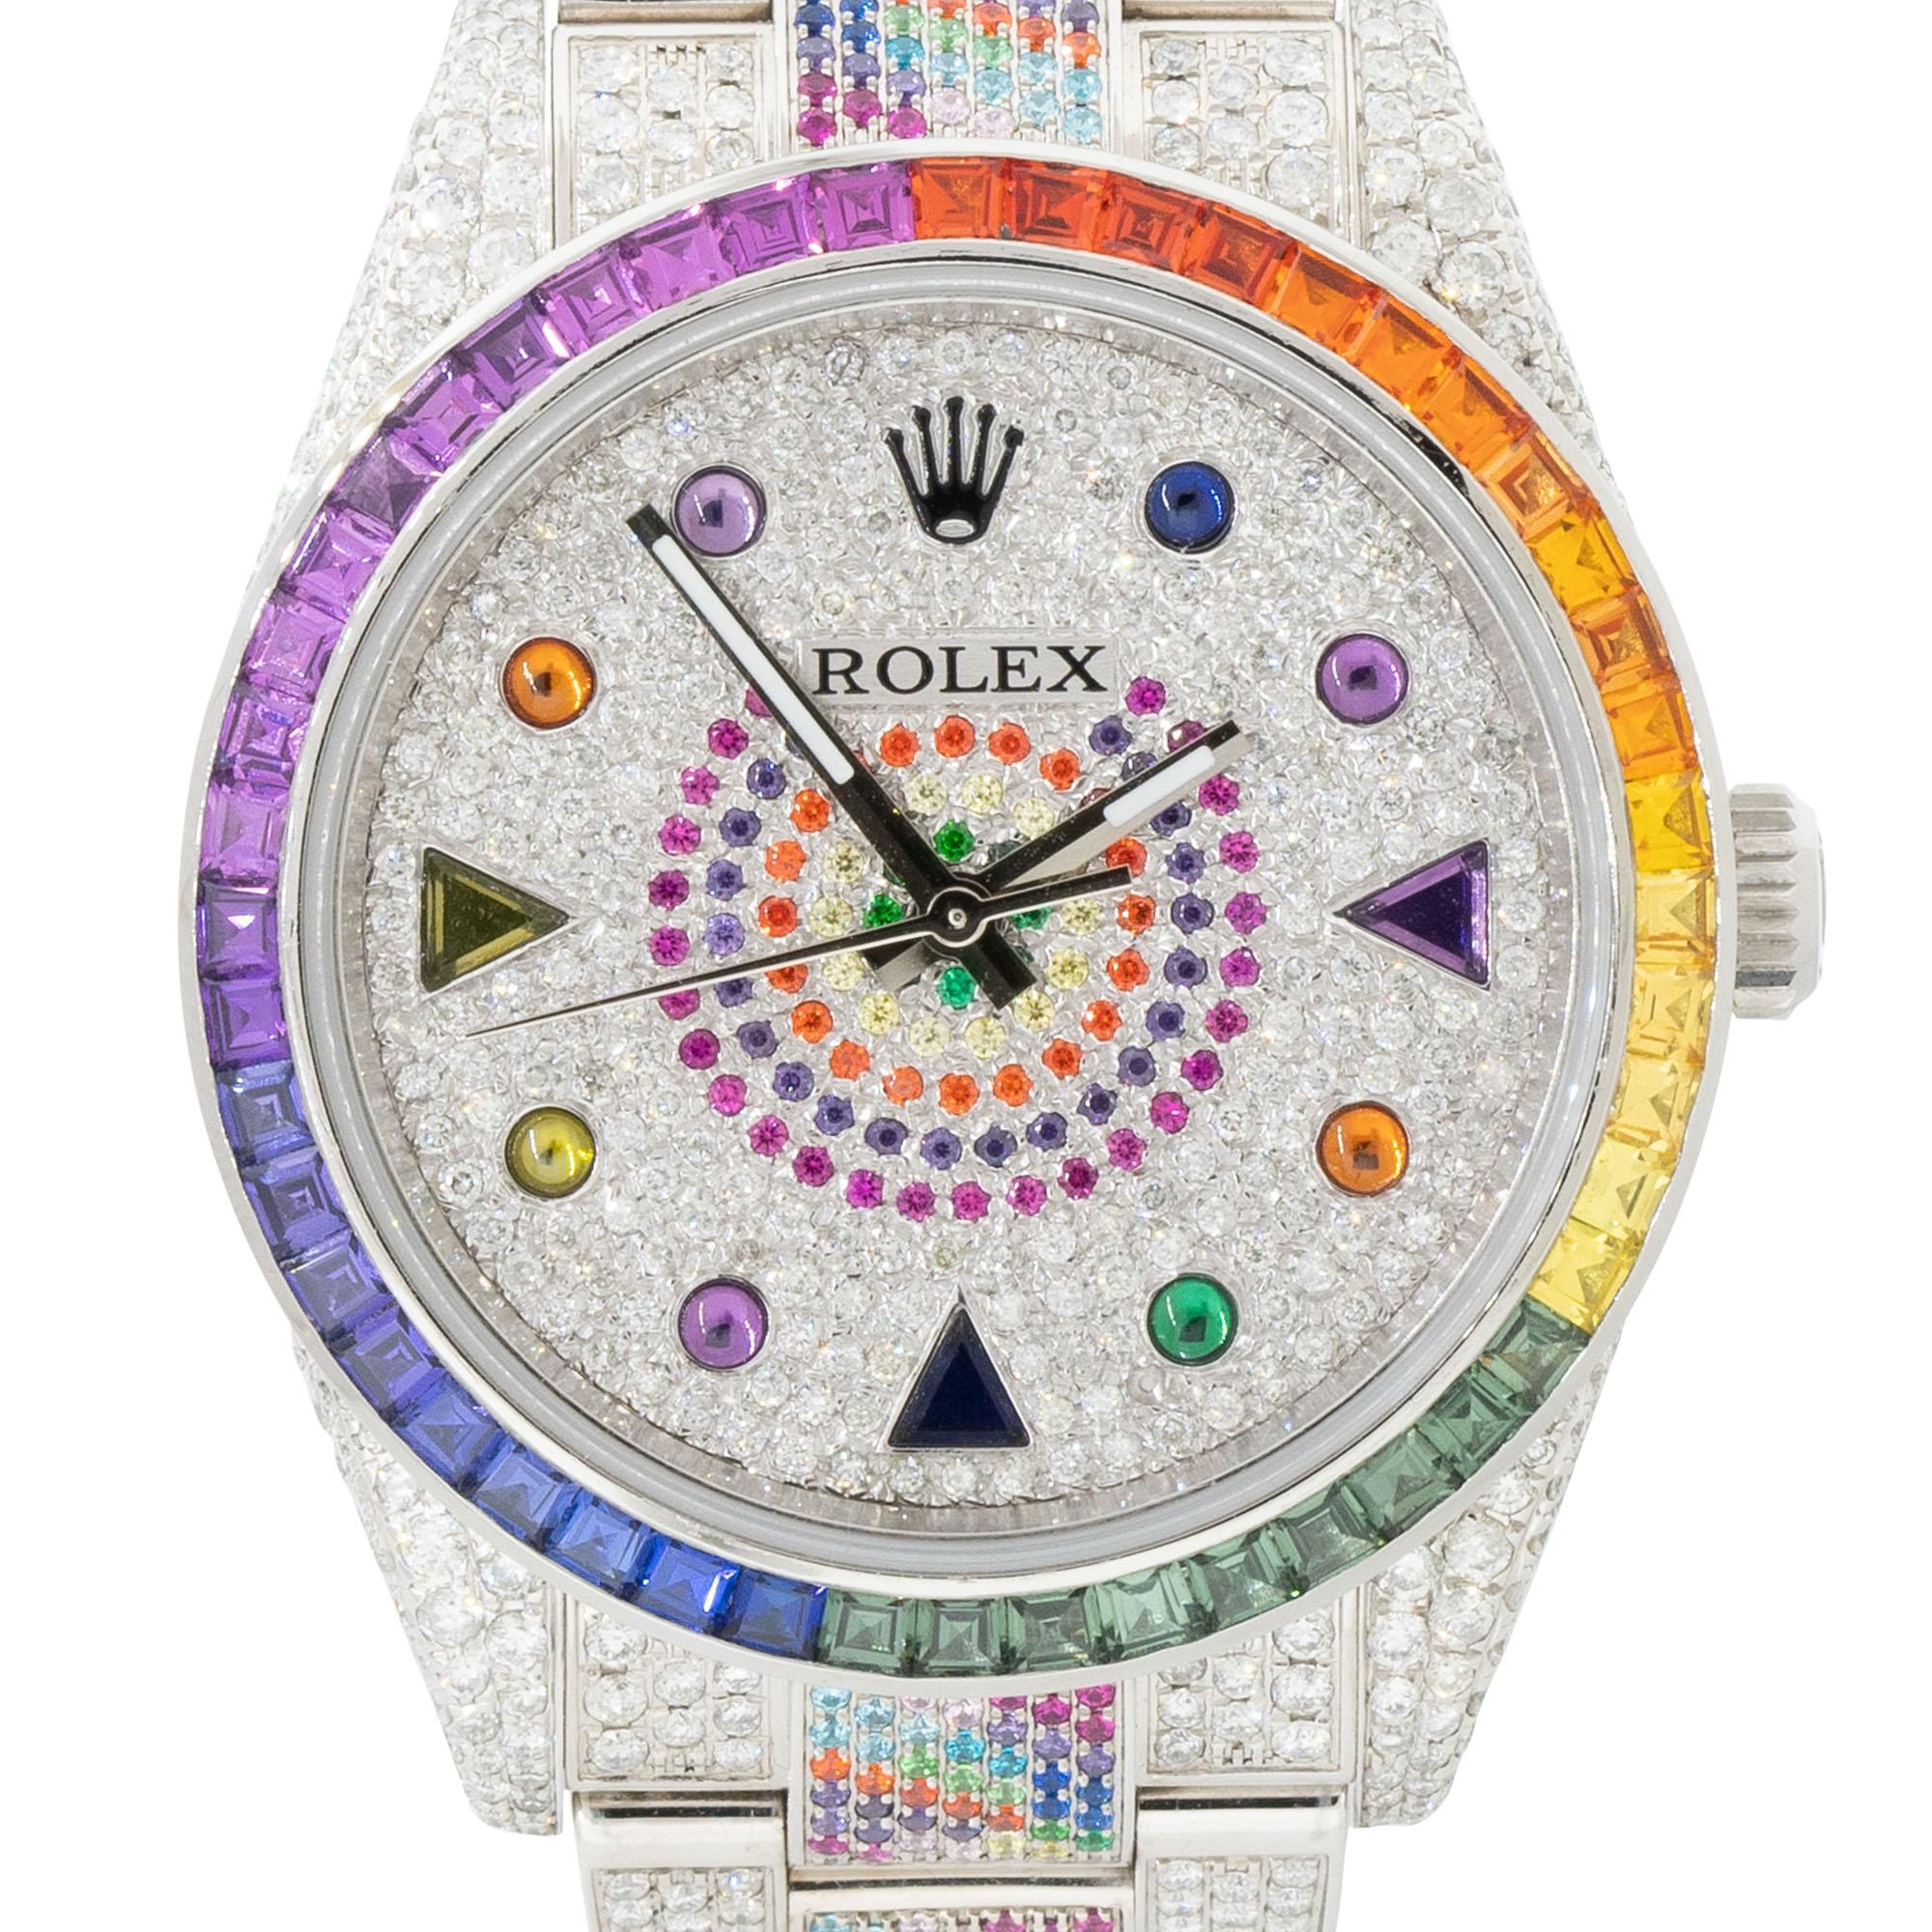 Brand: Rolex
MPN: 114300
Model: Oyster Perpetual
Case Material: Stainless Steel
Case Diameter: 39mm
Crystal: Sapphire Crystal
Bezel: Multi colored gemstone bezel (Aftermarket)
Dial: All Diamond, multi colored stone dial with silver hands and multi